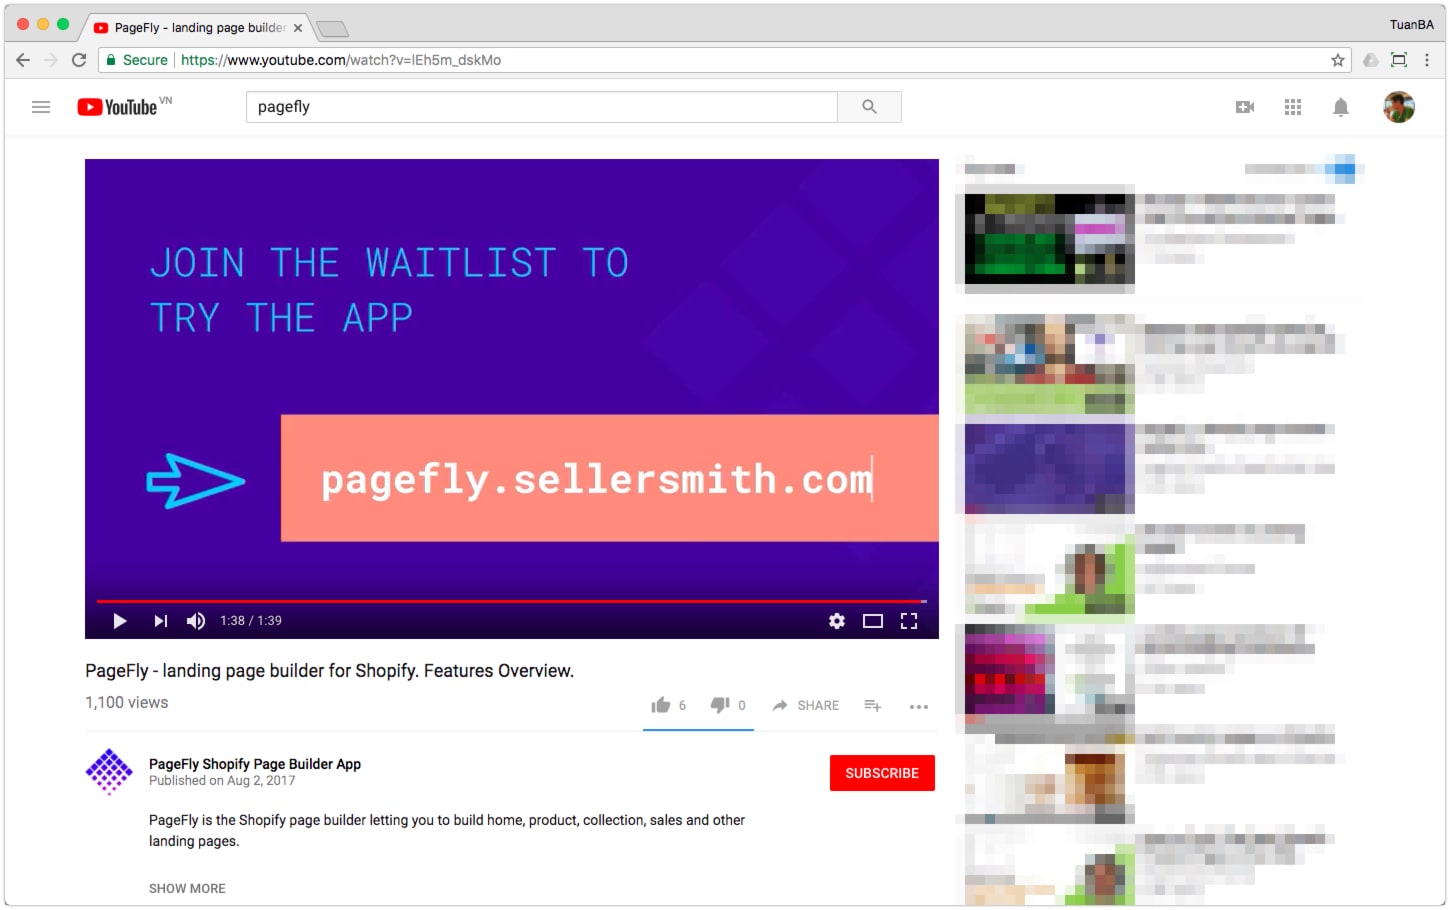 pagefly on youtube